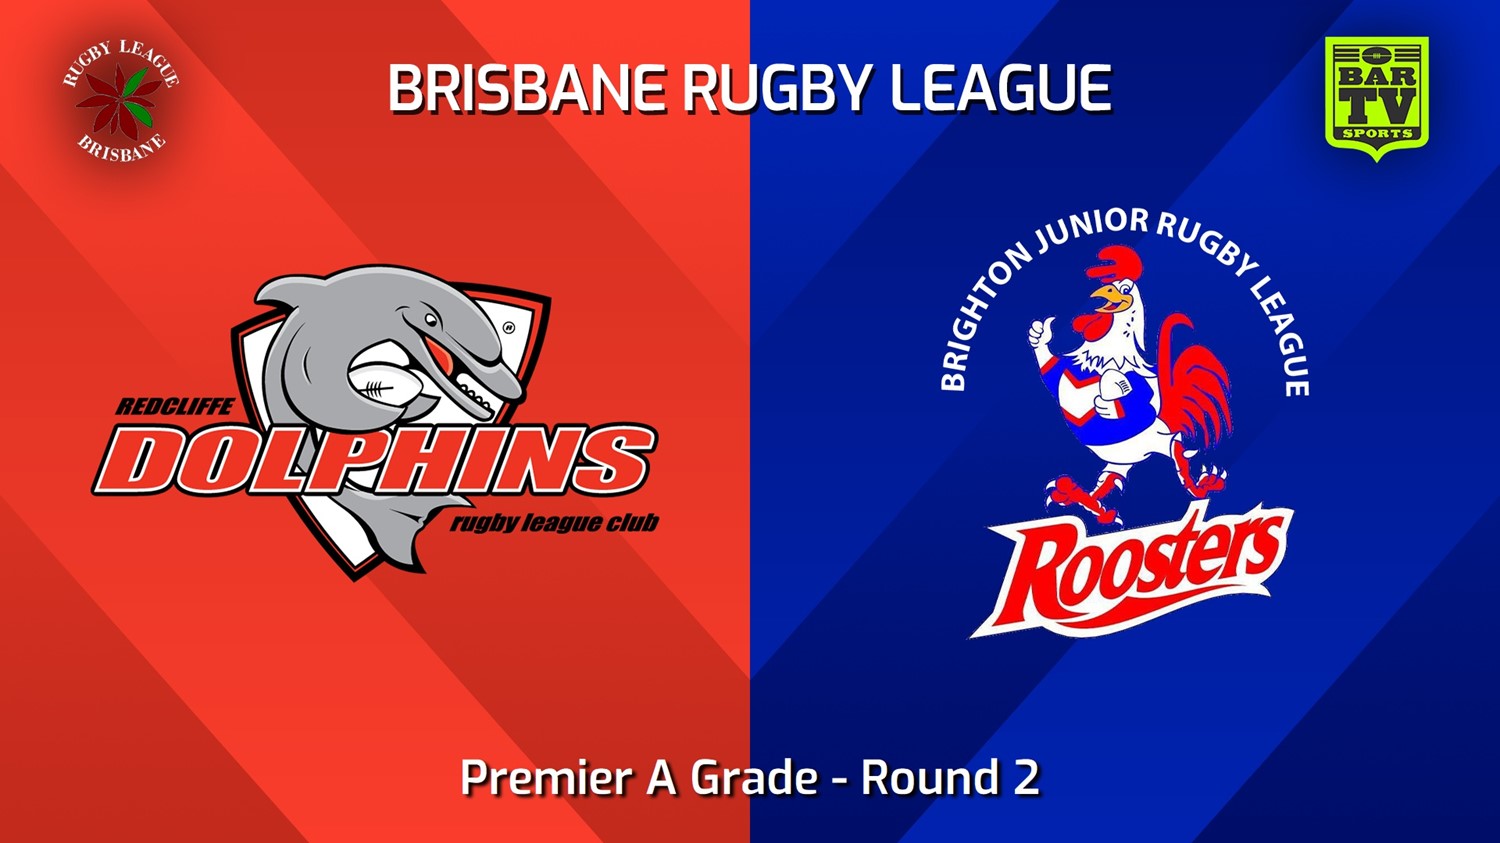 240413-BRL Round 2 - Premier A Grade - Redcliffe Dolphins v Brighton Roosters Minigame Slate Image